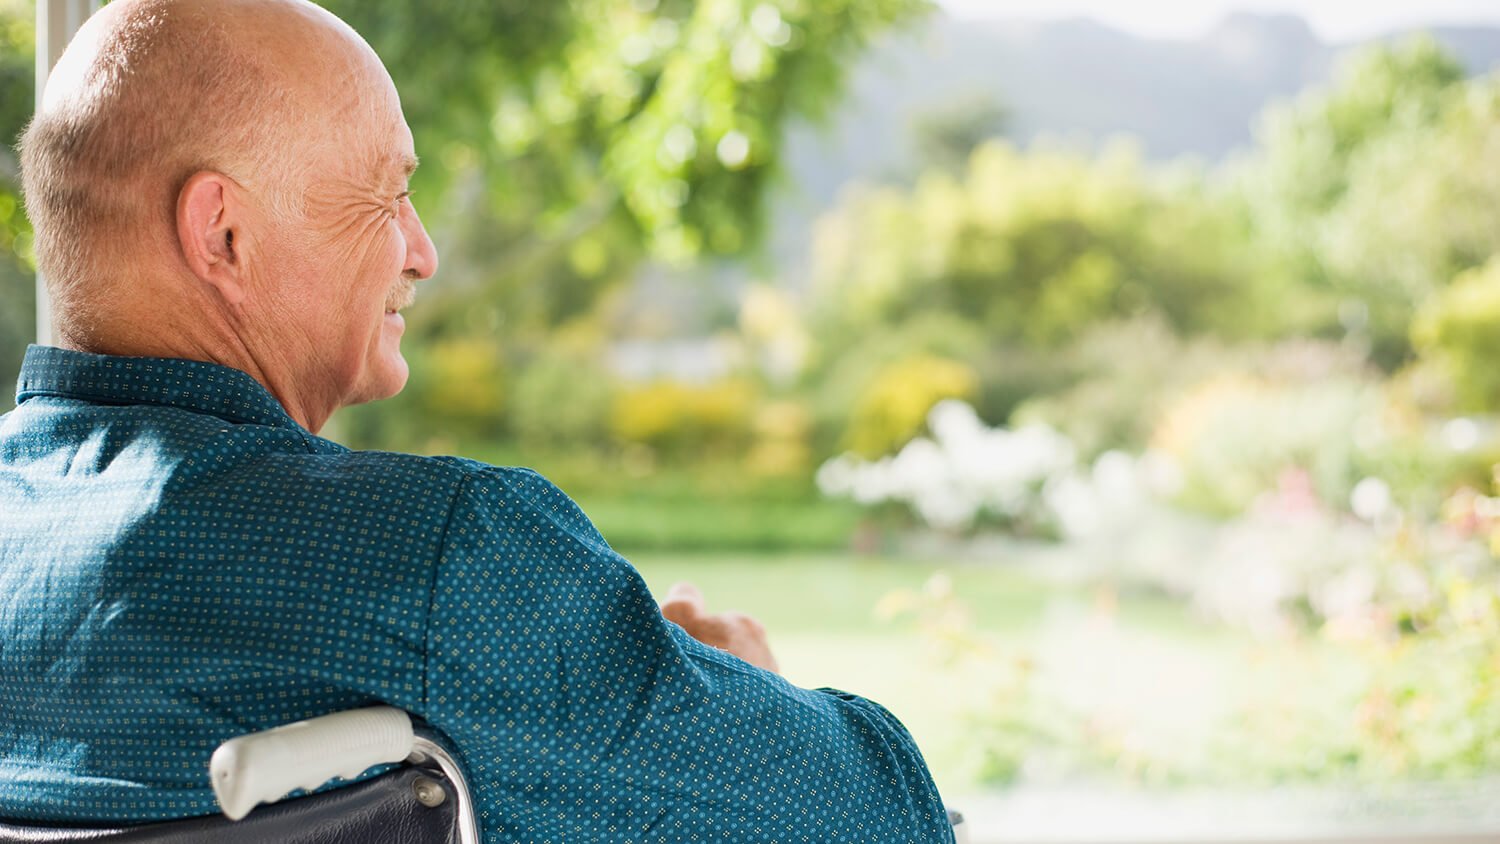 Old man in a wheelchair looking at a garden on a sunny day